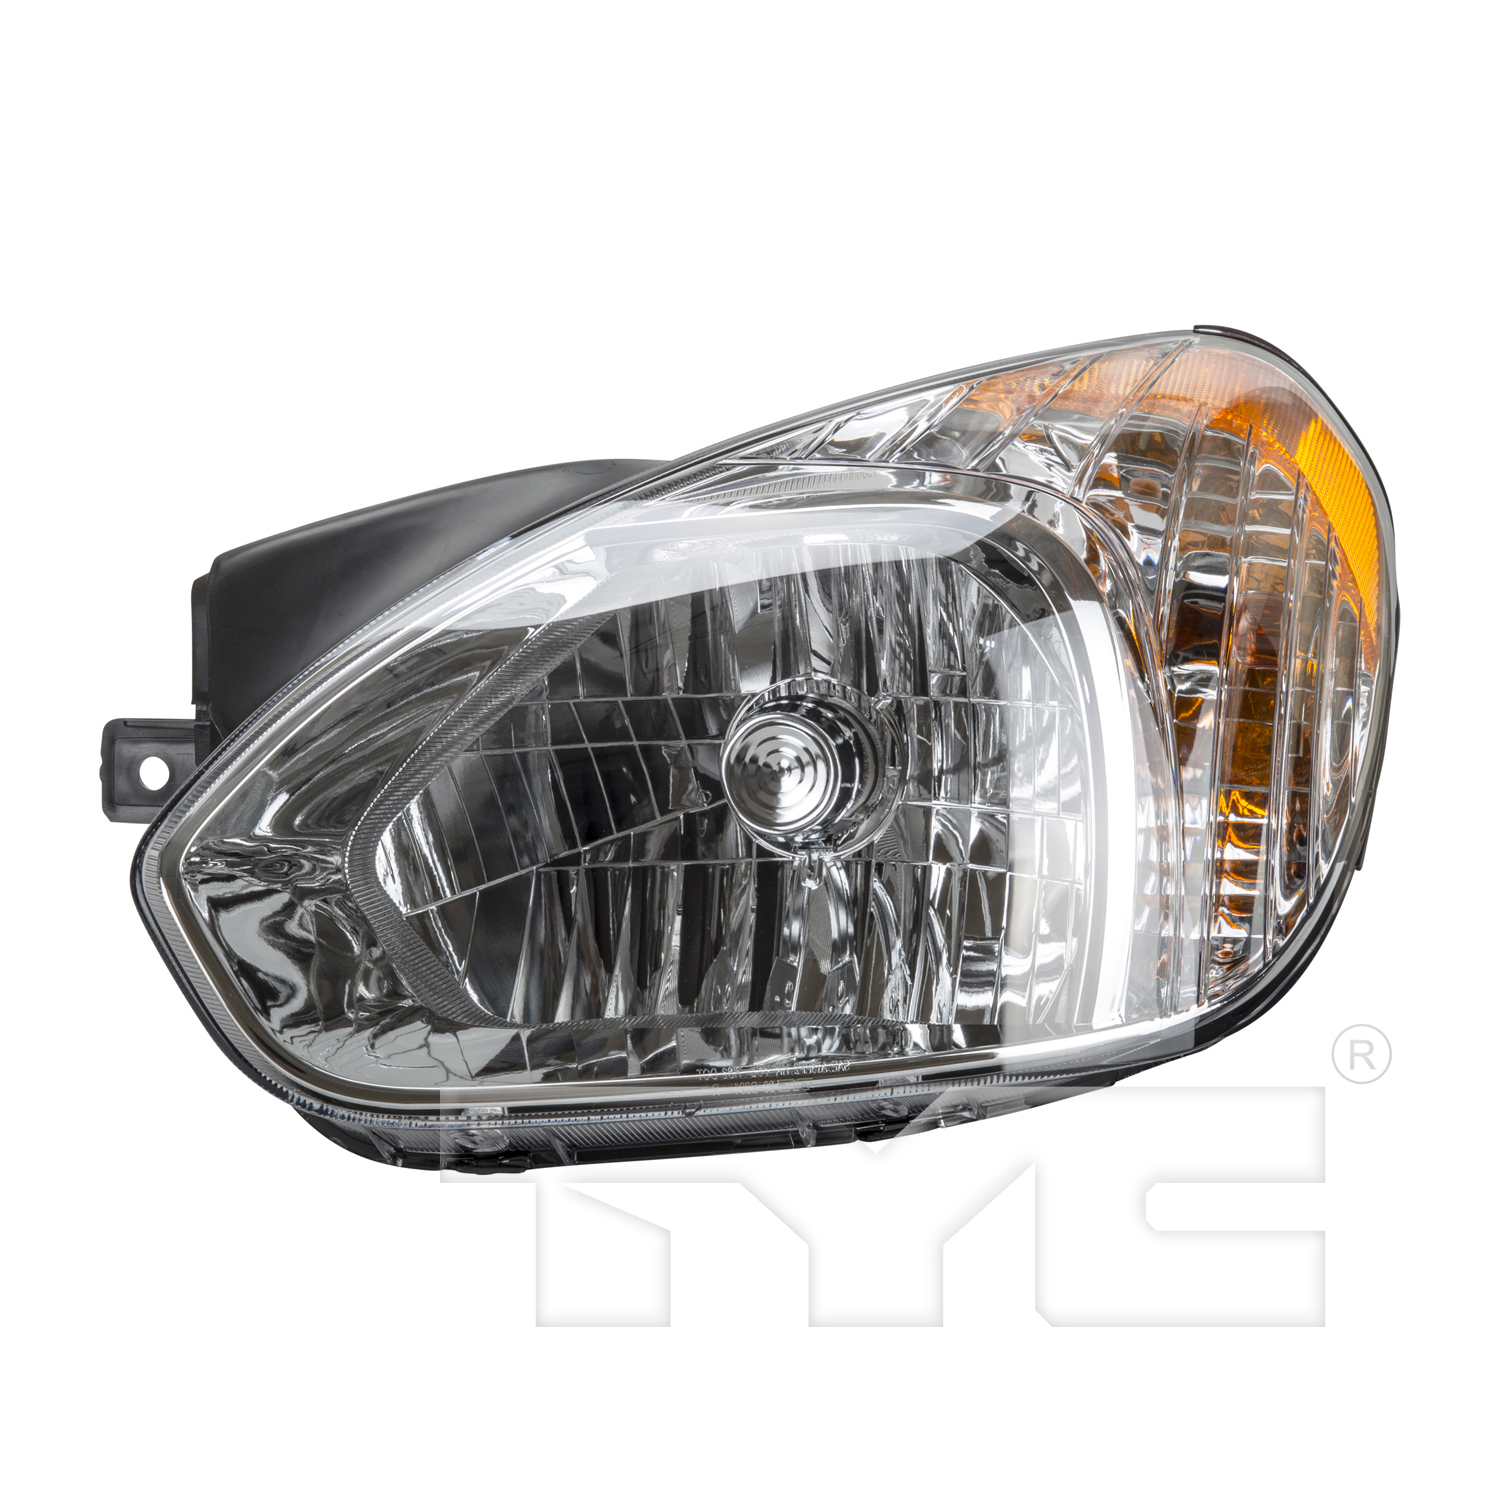 Aftermarket HEADLIGHTS for HYUNDAI - ACCENT, ACCENT,07-11,LT Headlamp assy composite